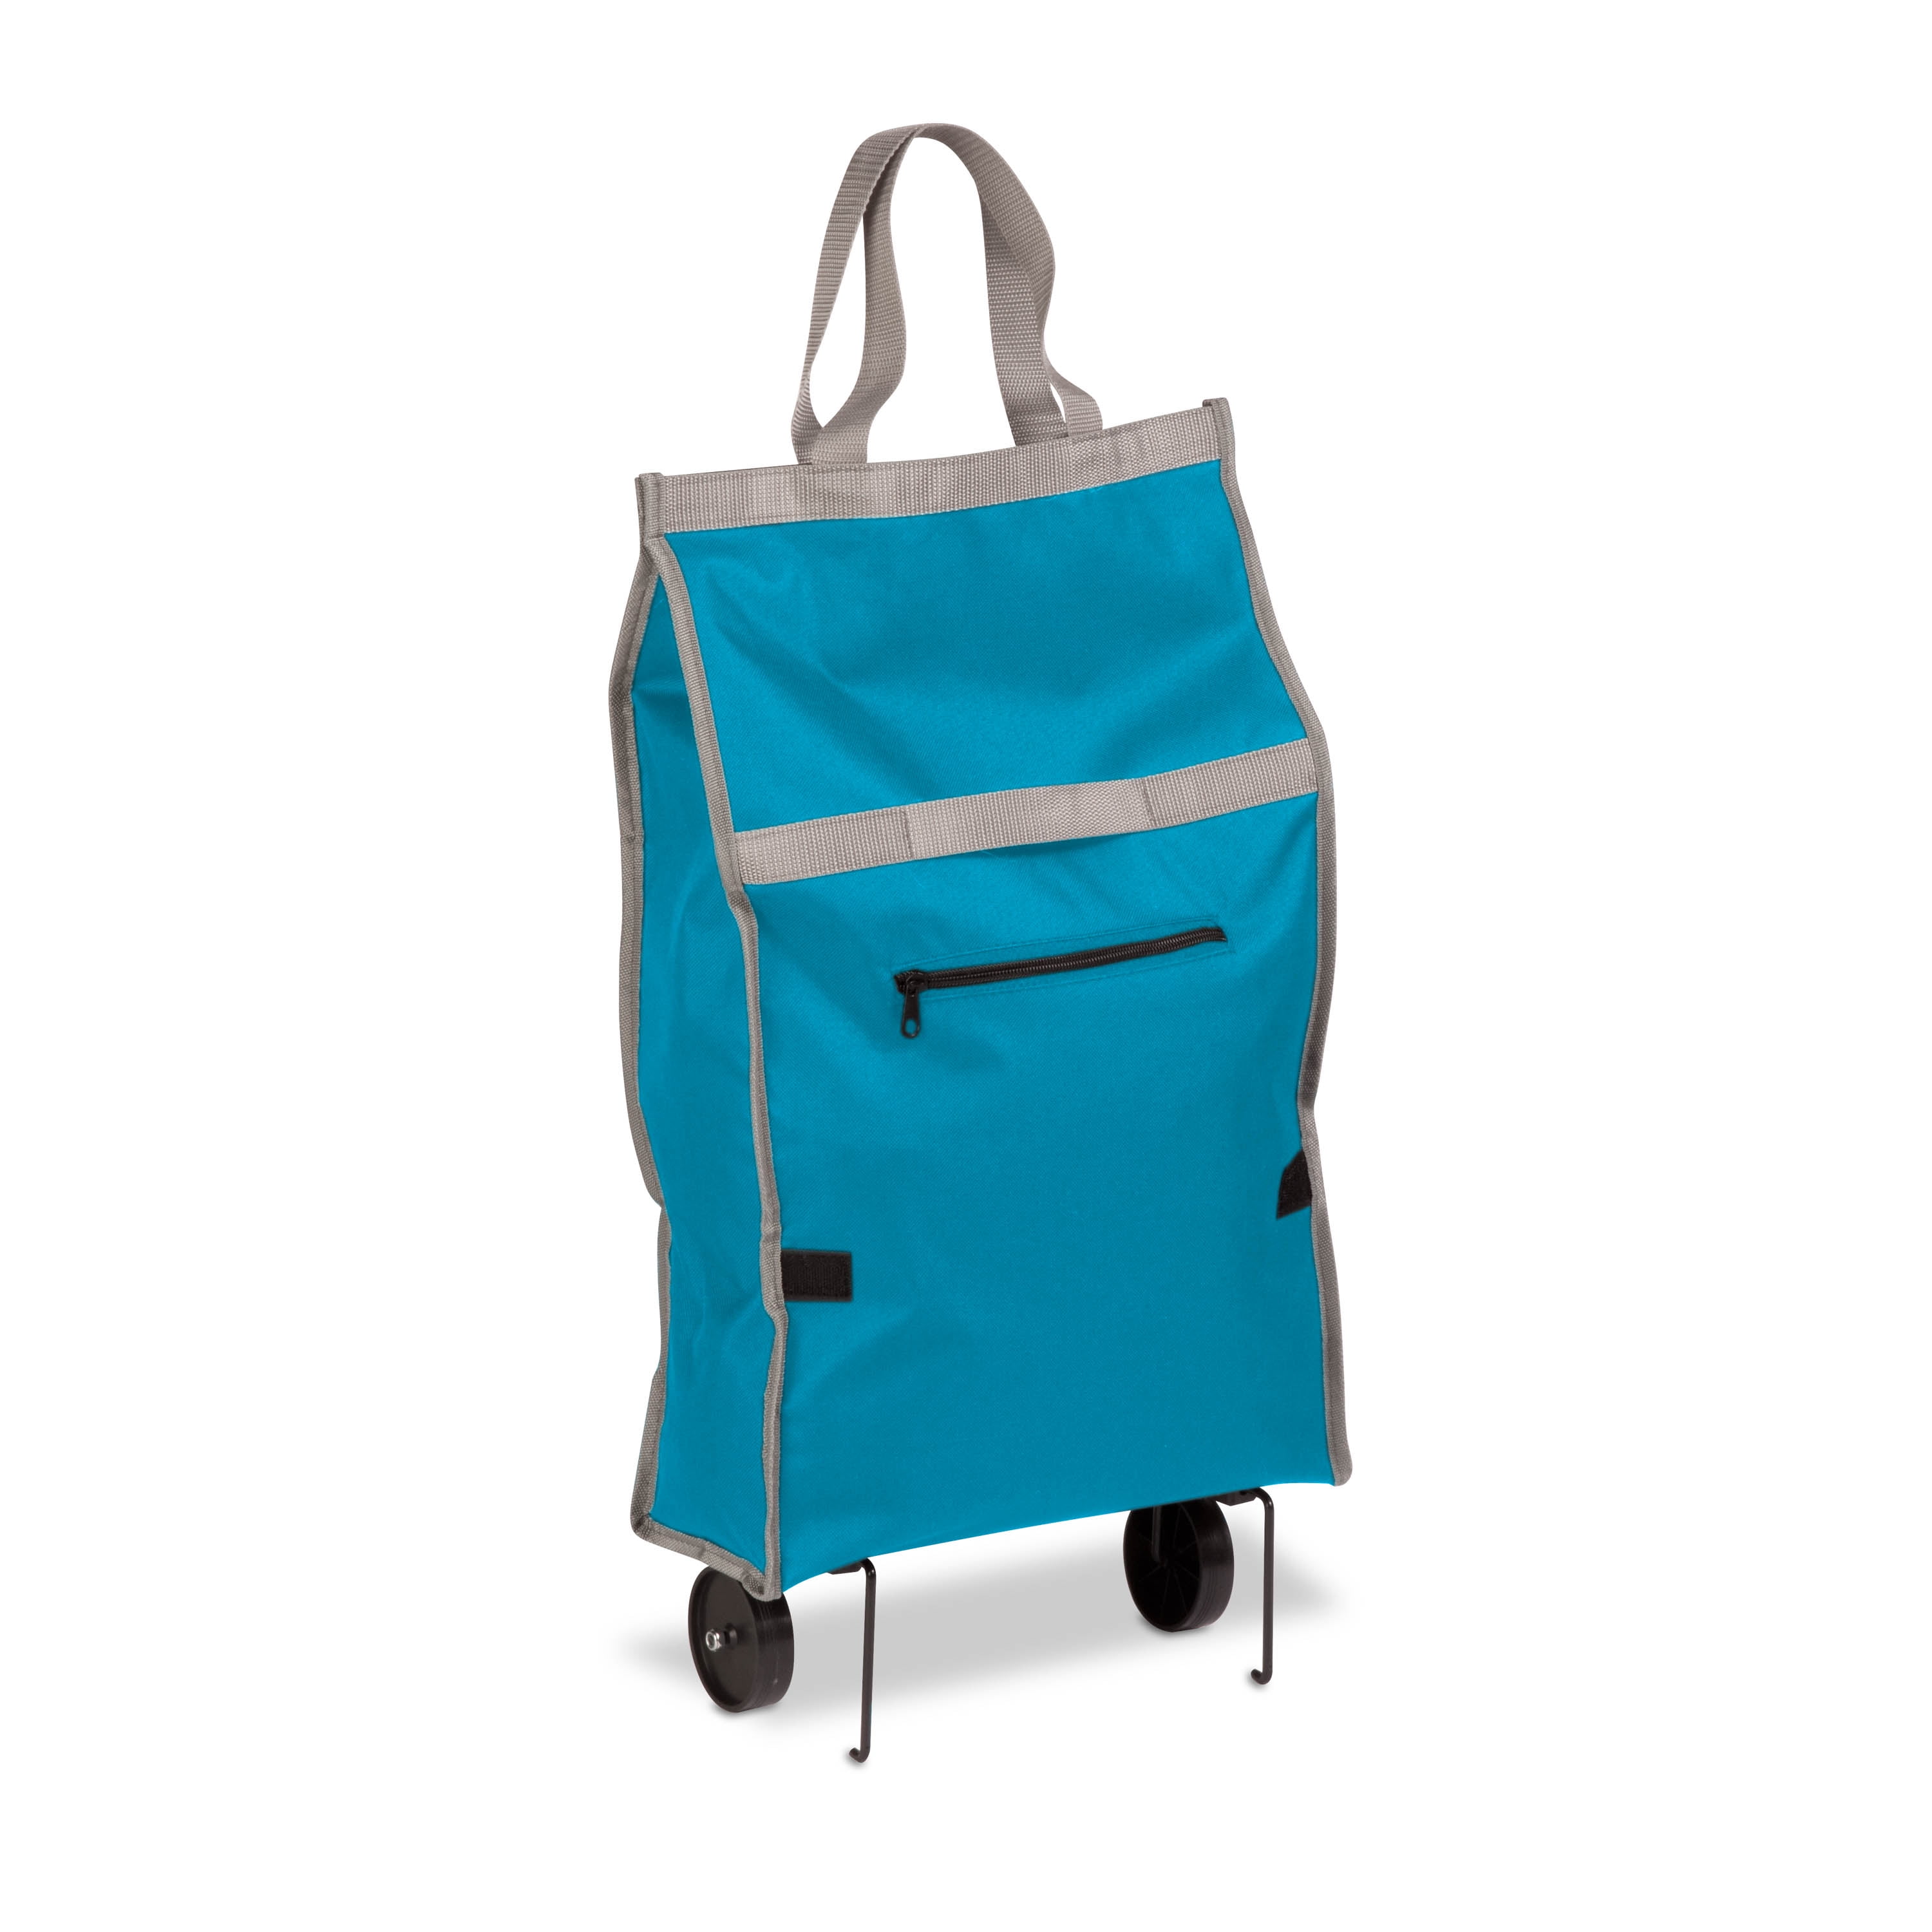 NEW Honey-Can-Do CRT-02224 Fold-Up Fabric Rolling Bag Cart with Handles 